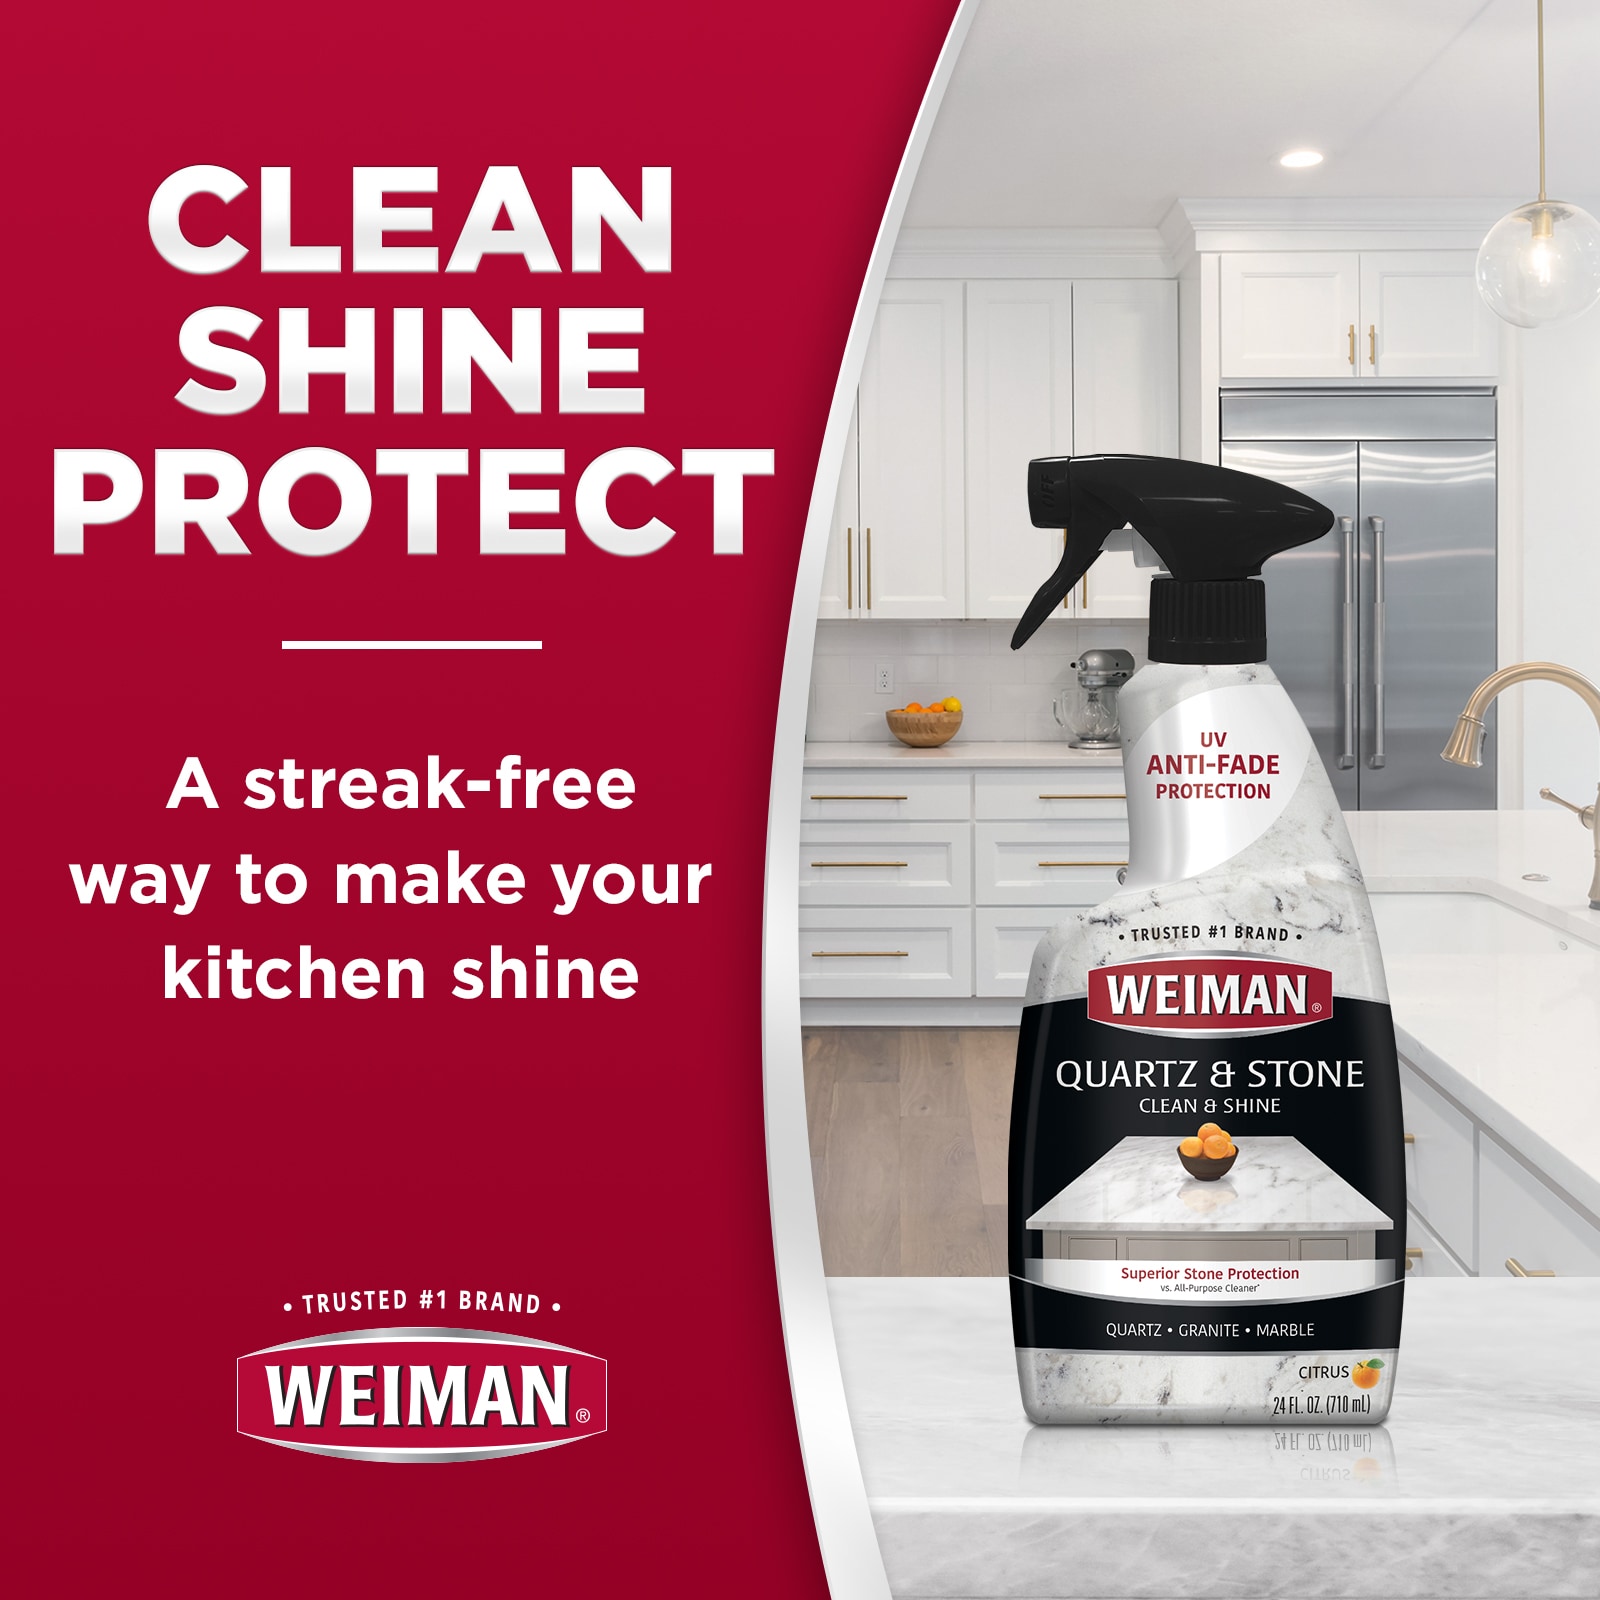 WEIMAN PRODUCTS CLEANER HAND HEAVY DUTY 18OZ